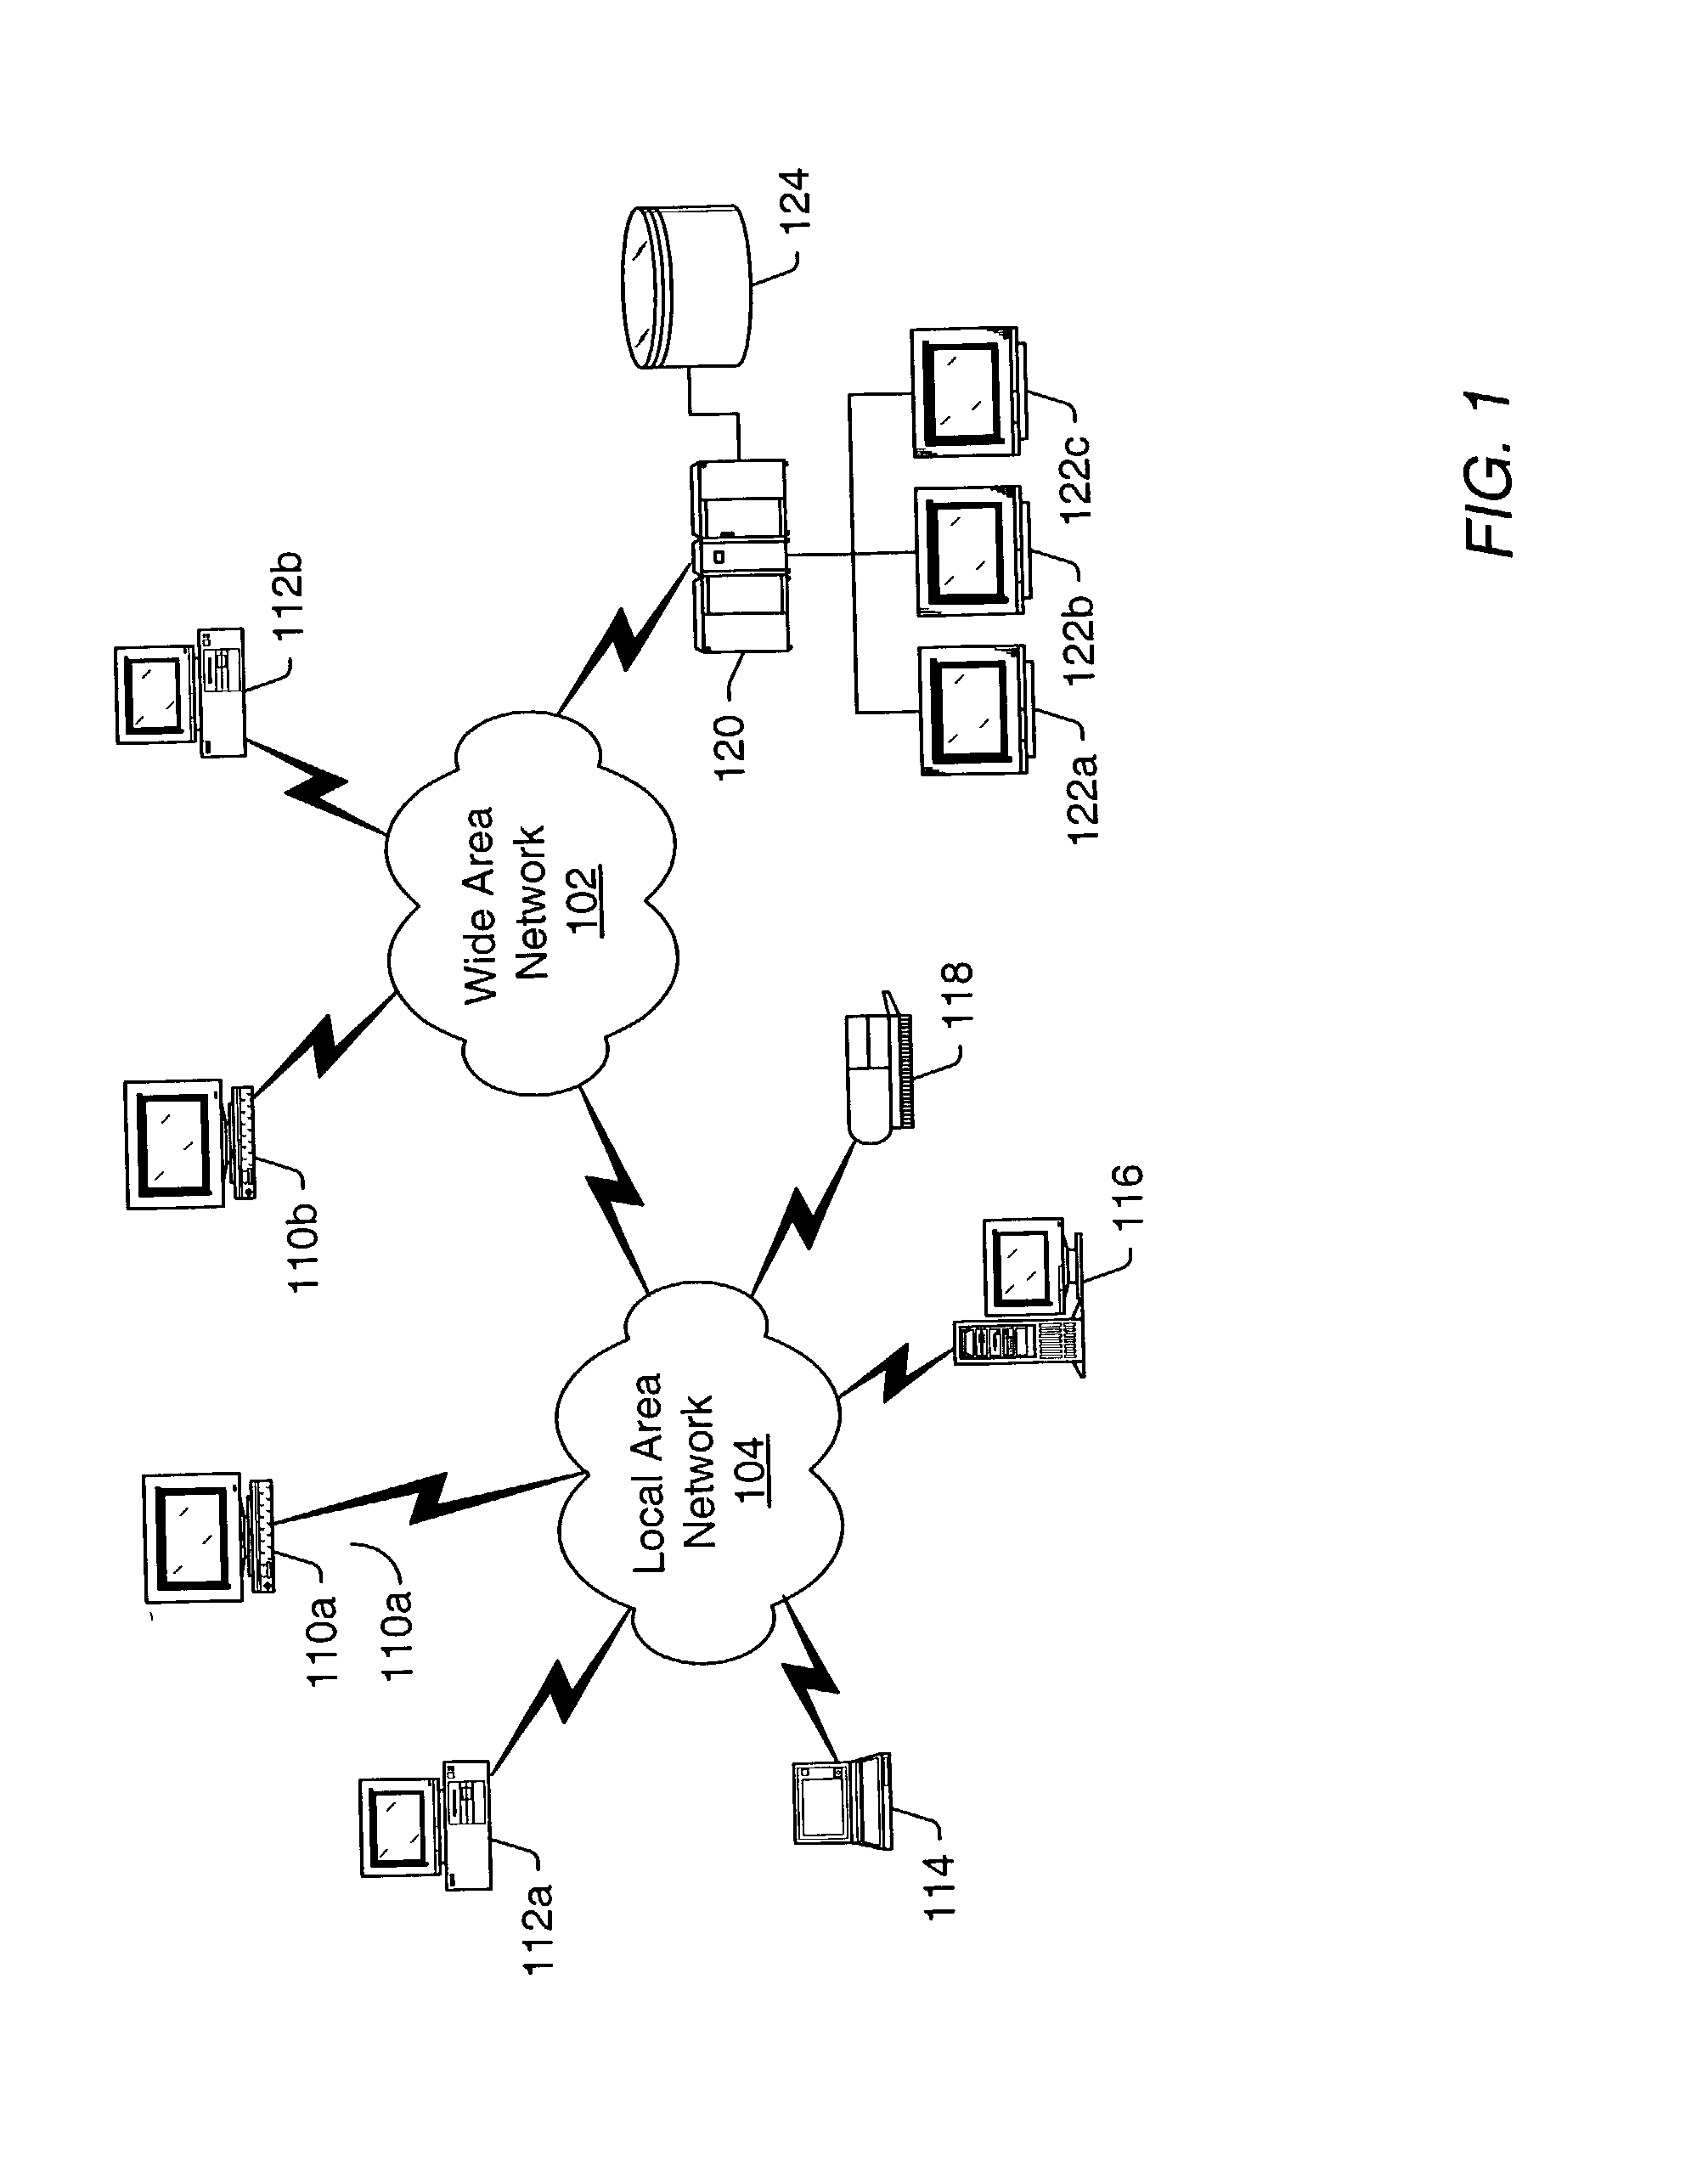 System and method for enhanced software updating and revision